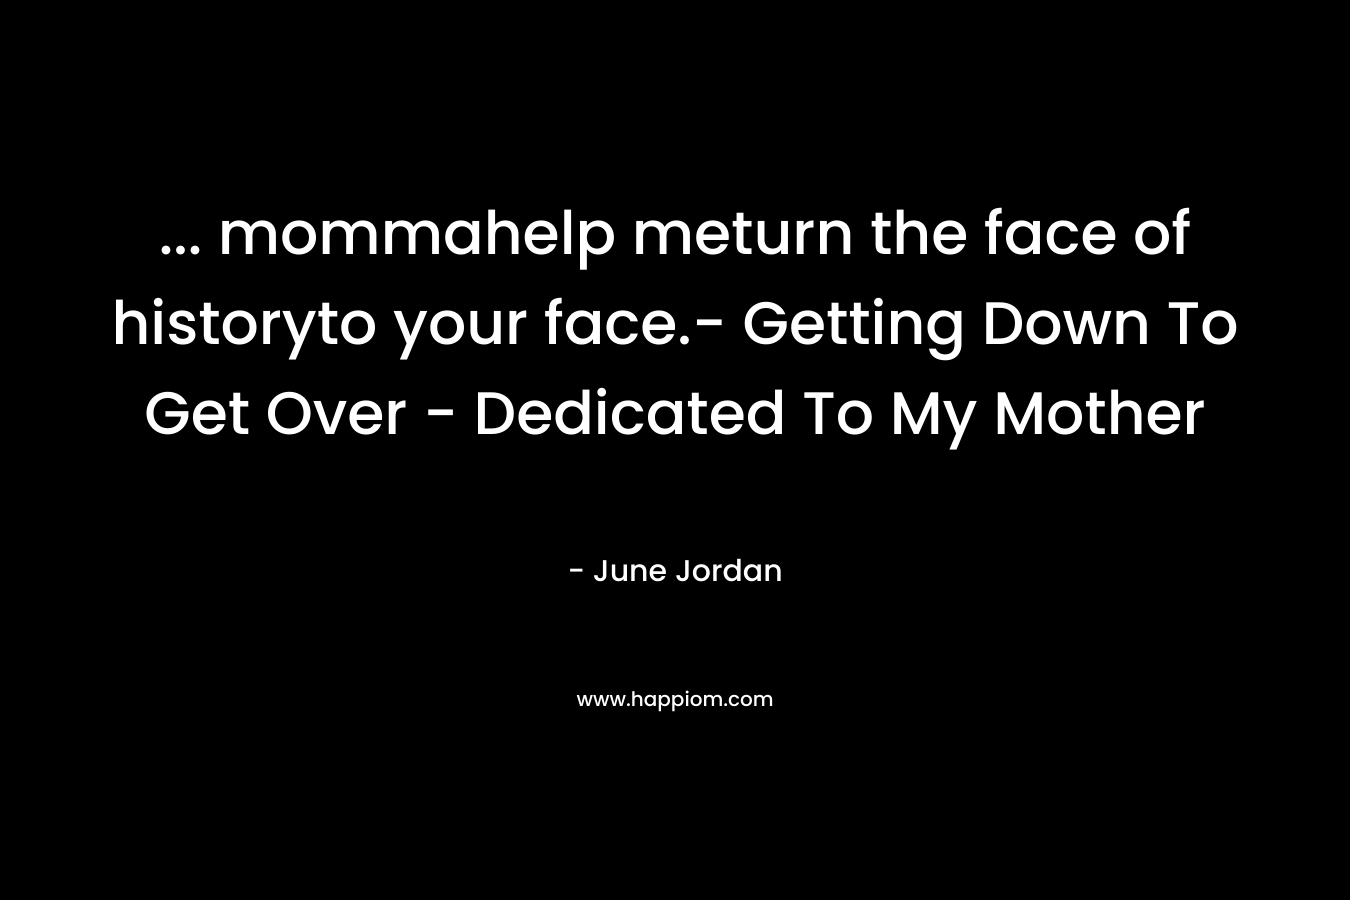 … mommahelp meturn the face of historyto your face.- Getting Down To Get Over – Dedicated To My Mother – June Jordan